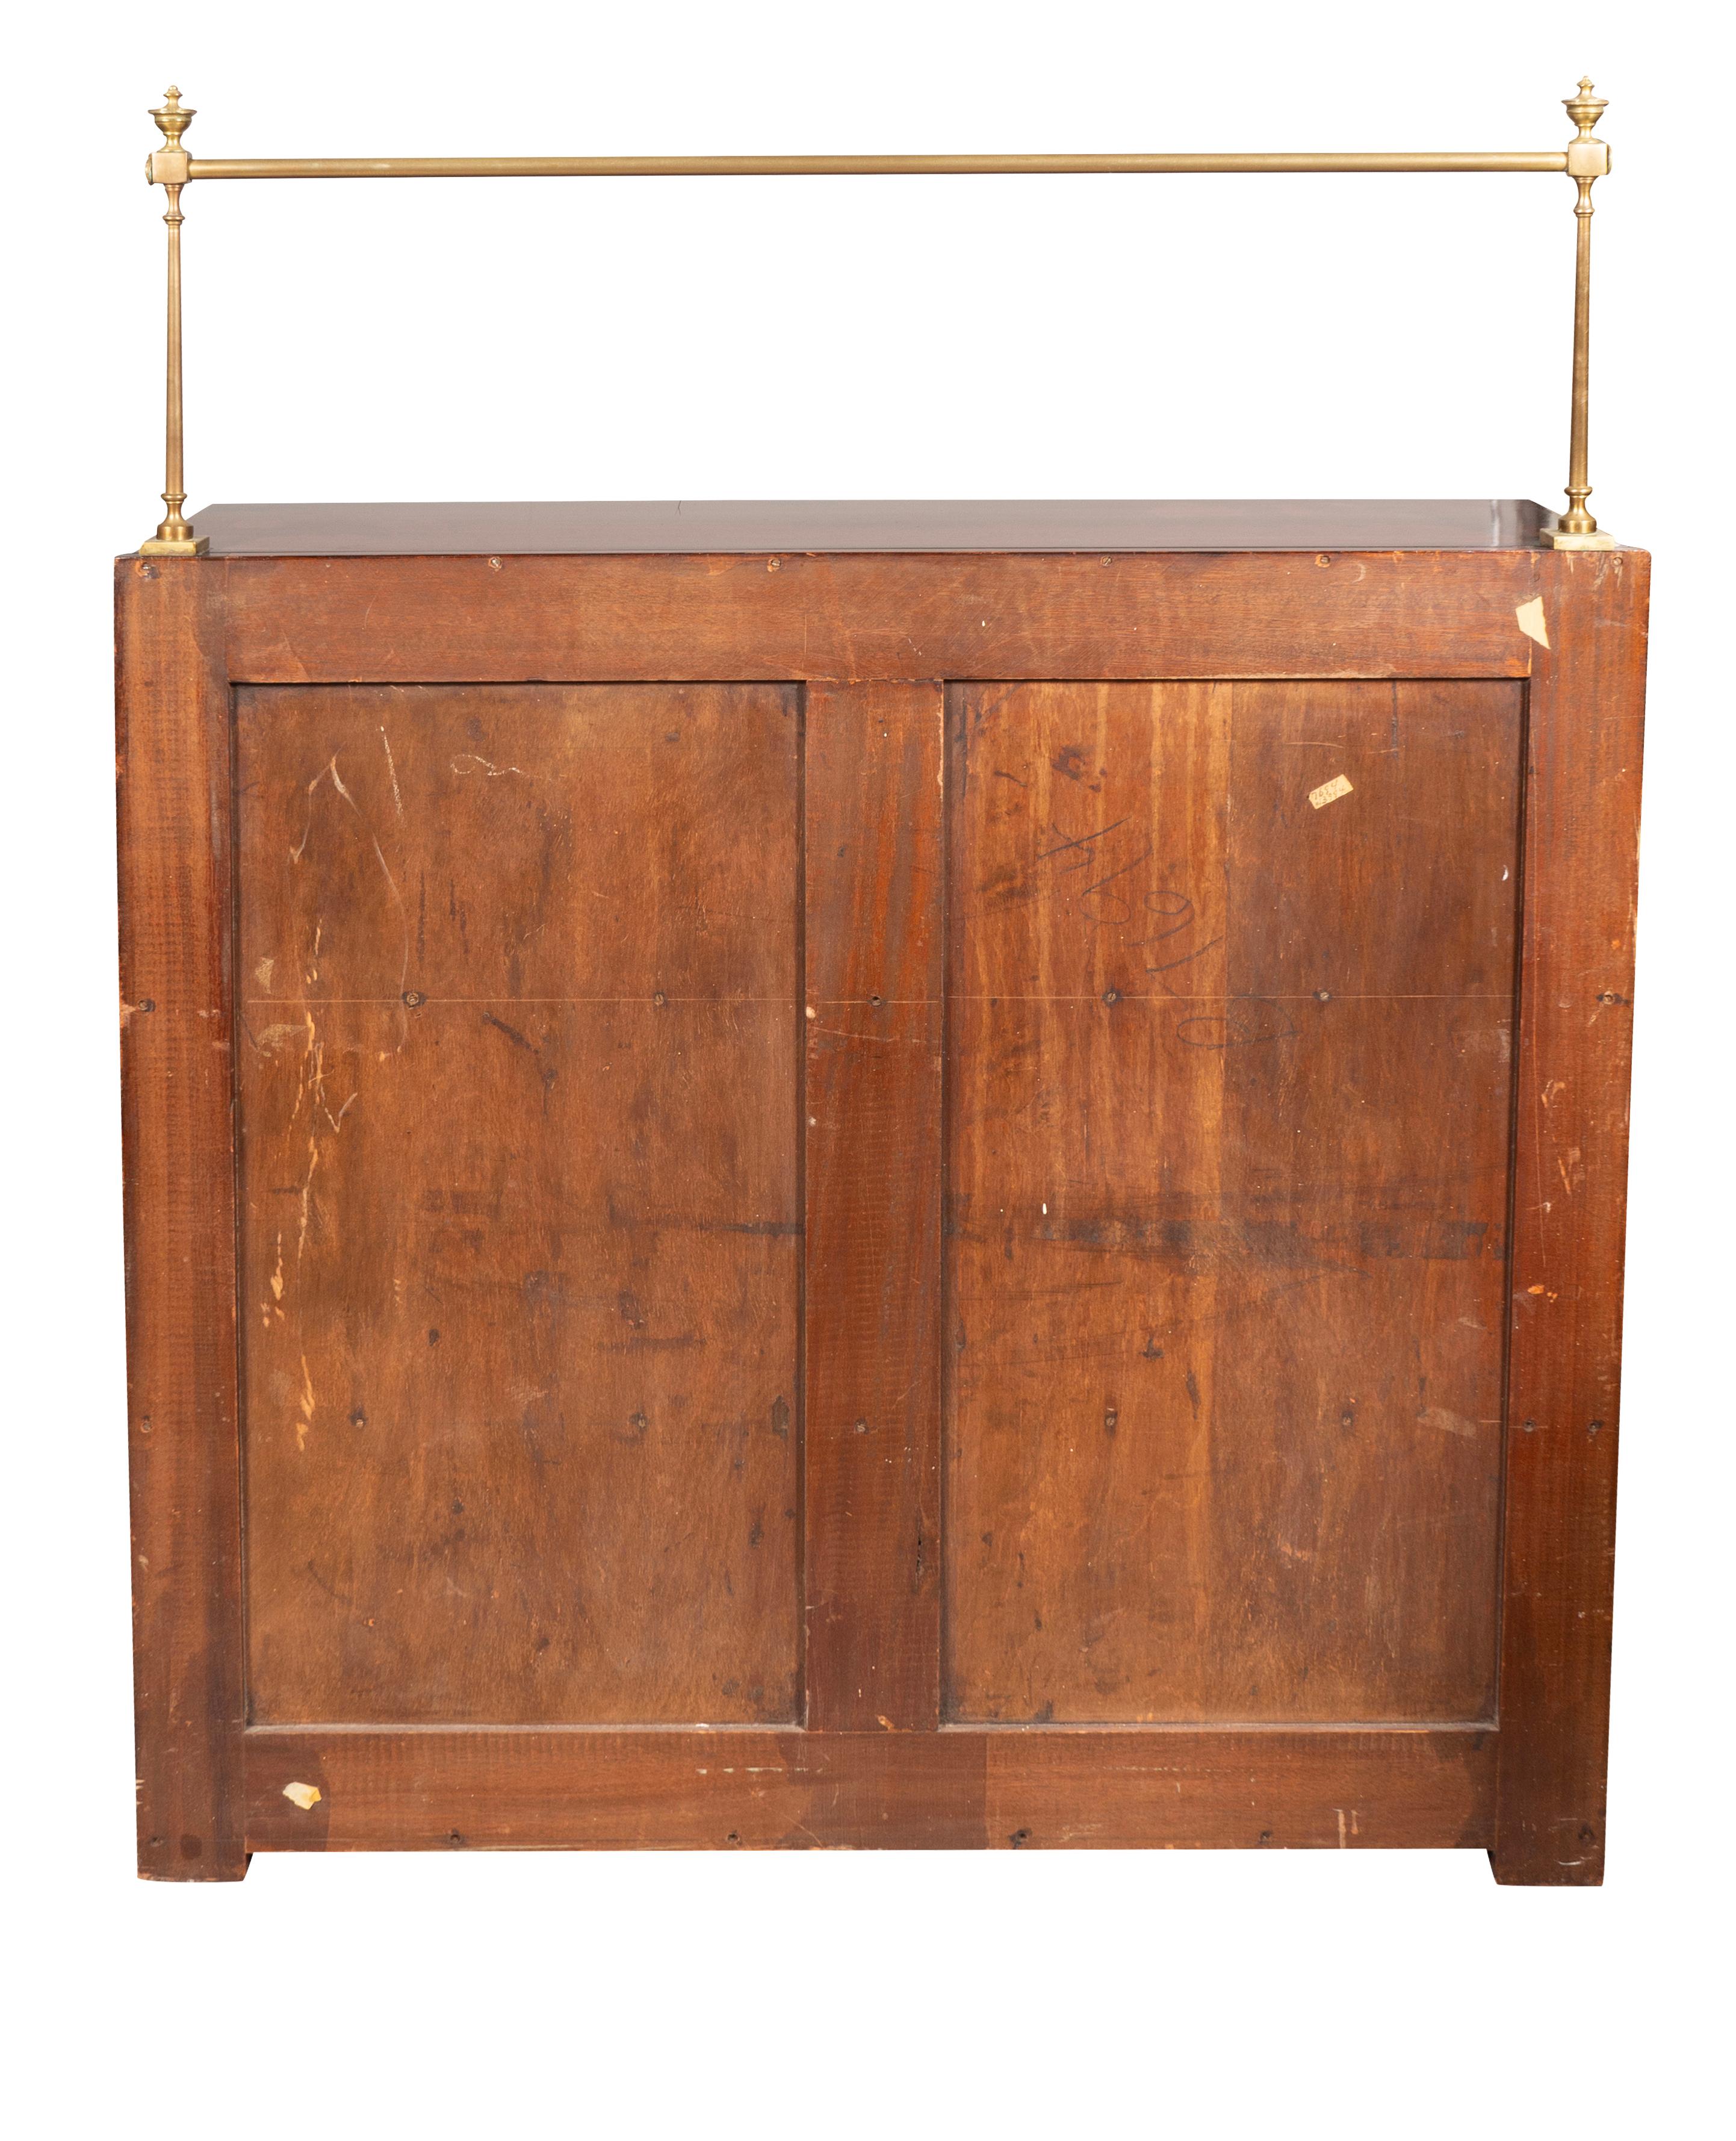 20th Century Regency Style Mahogany And Brass Open Bookcase For Sale